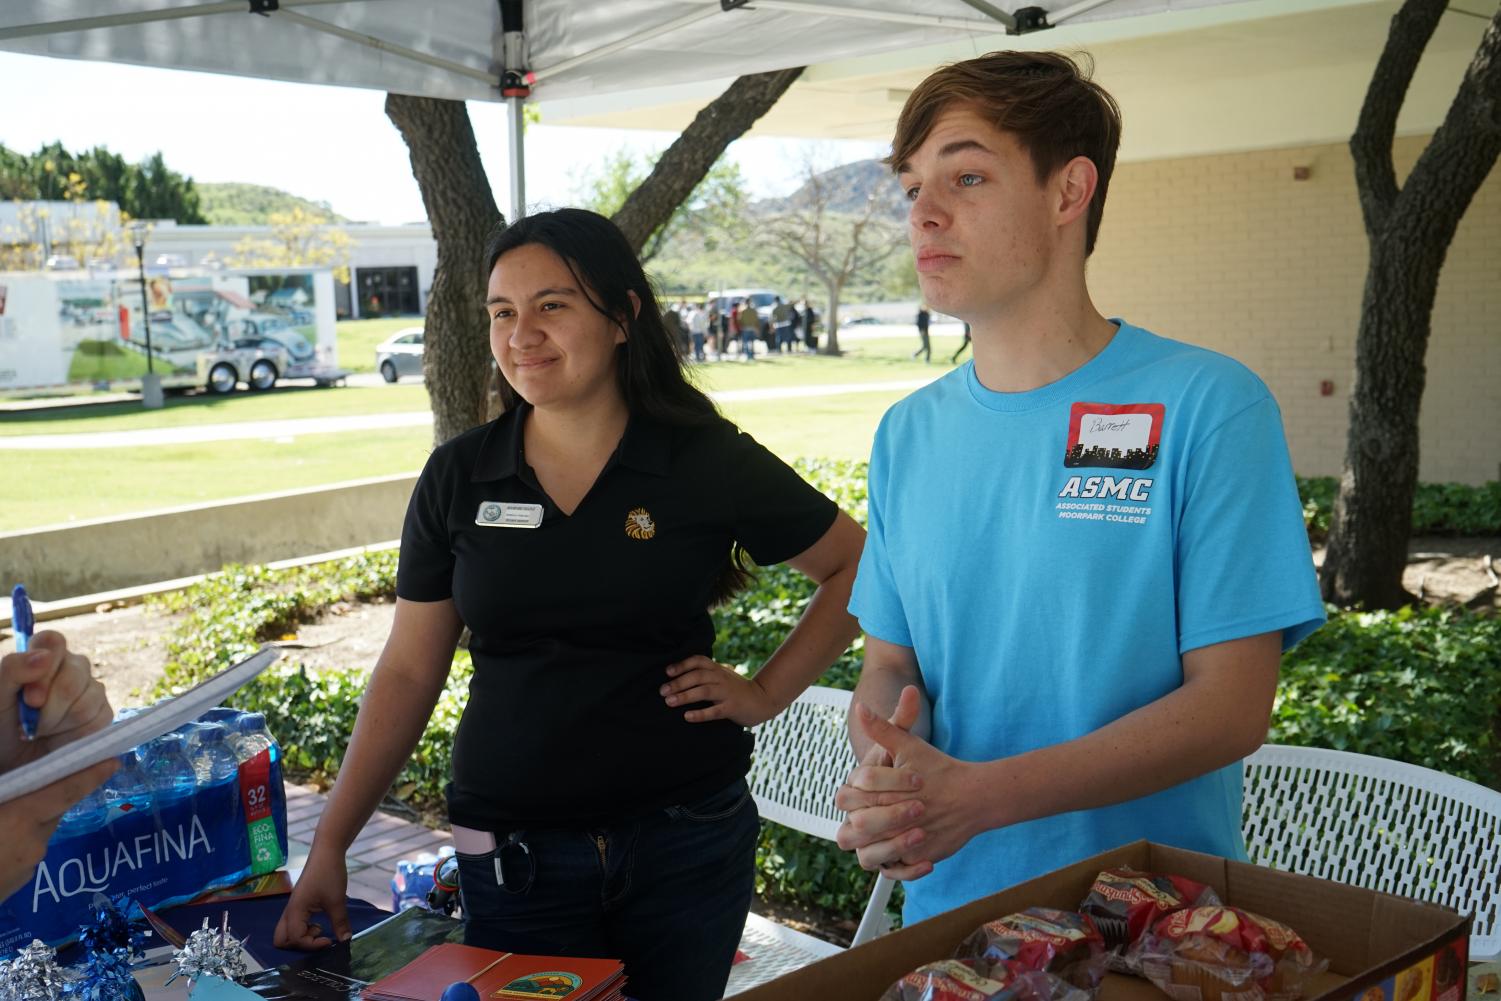 Career Transfer Center worker Jessica Forter, 24, and Communications club president Barrett Kocher, 20, help out with the process of finding internships and jobs during the Career and Internship Expo